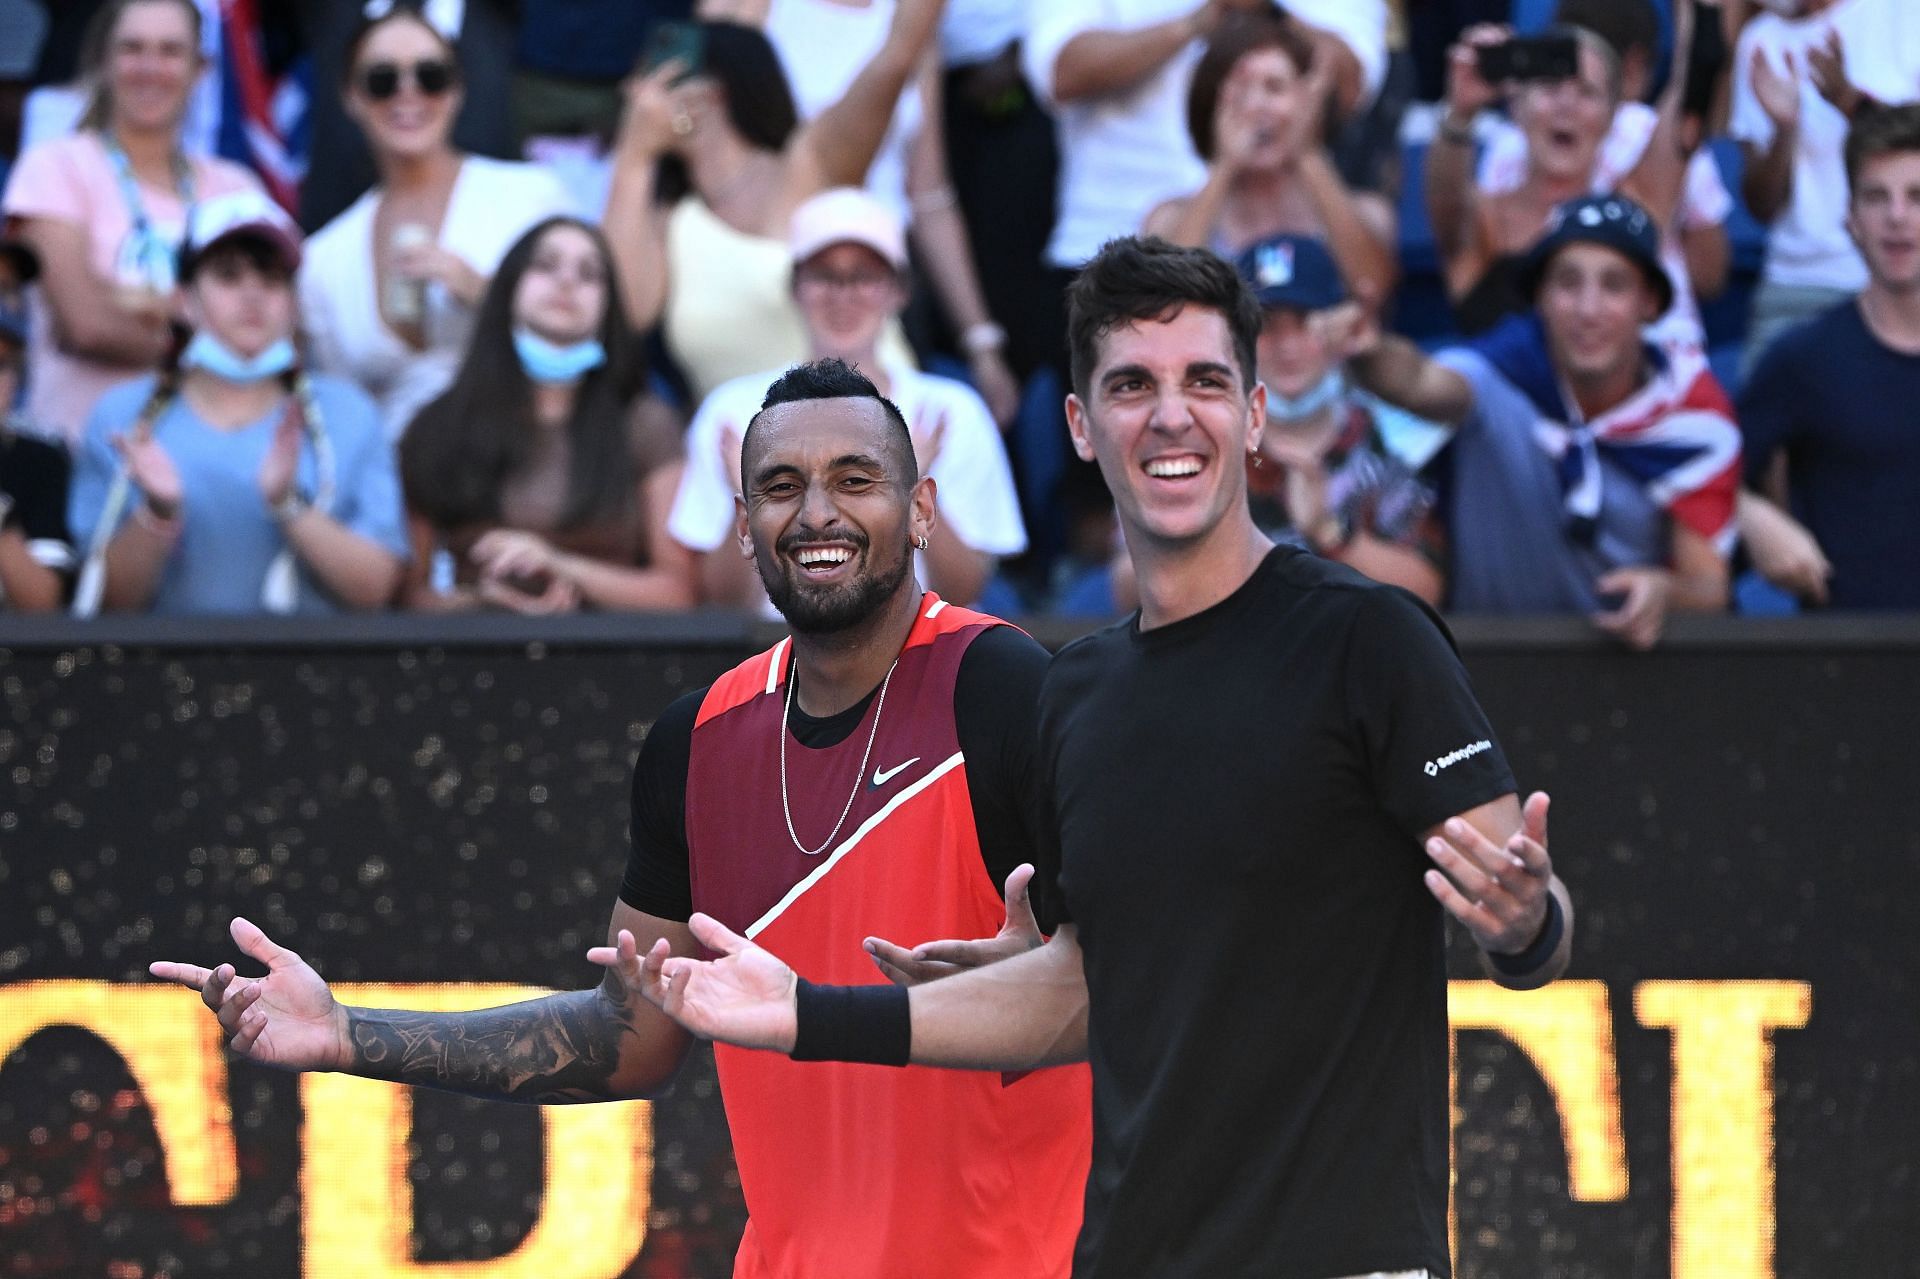 Nick Kyrgios and Thanasi Kokkinakis are two matches away from their first Grand Slam title